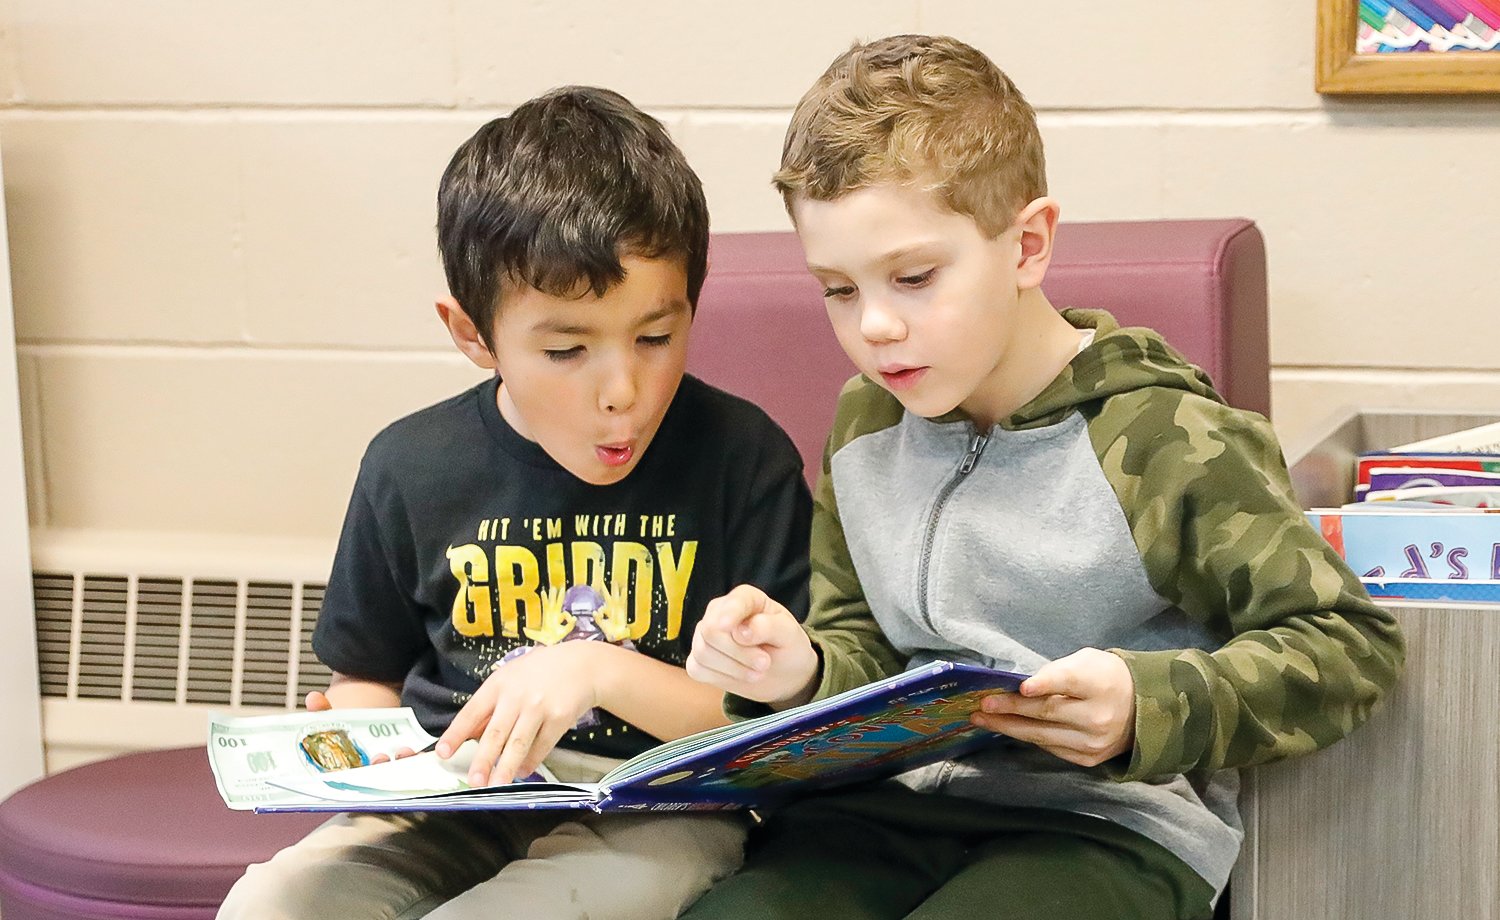 Elius Strong and Boone Broten appear fascinated with a book they’re reading together.